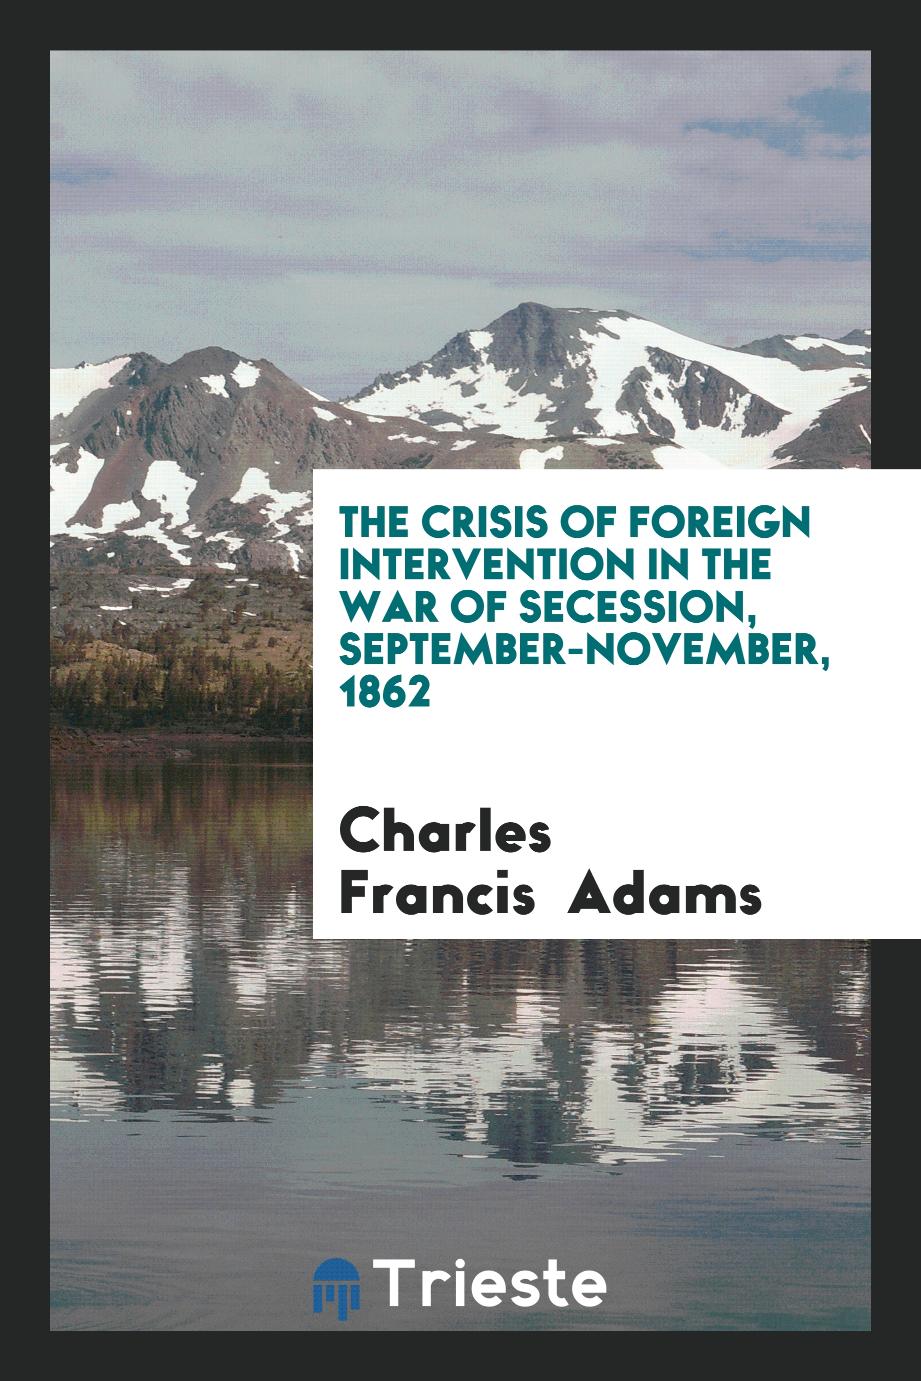 The Crisis of Foreign Intervention in the War of Secession, September-November, 1862